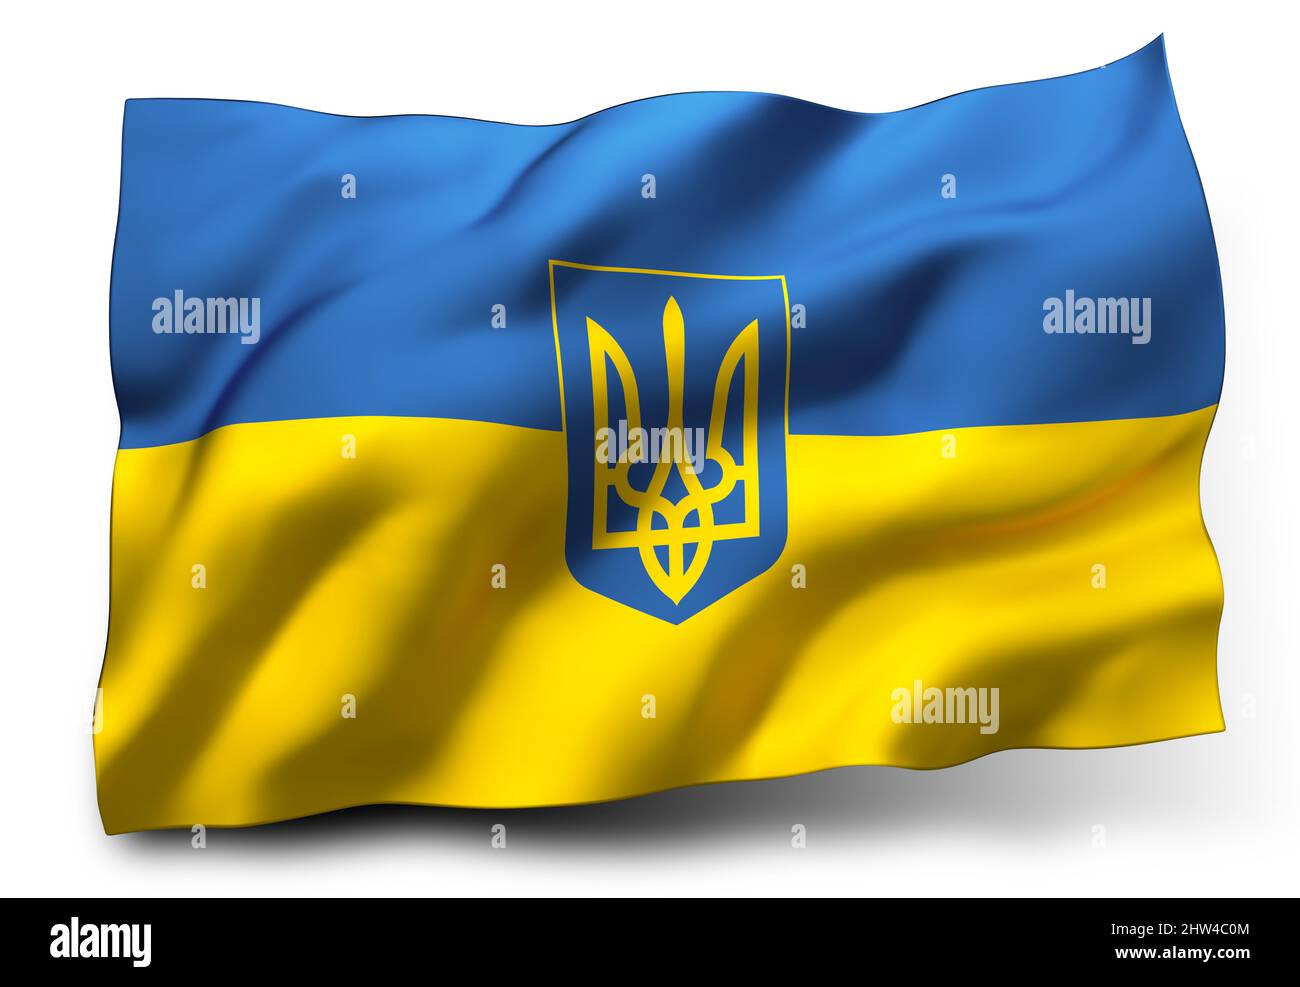 Waving flag of Ukraine, with coat of arms, isolated on white background Stock Photo